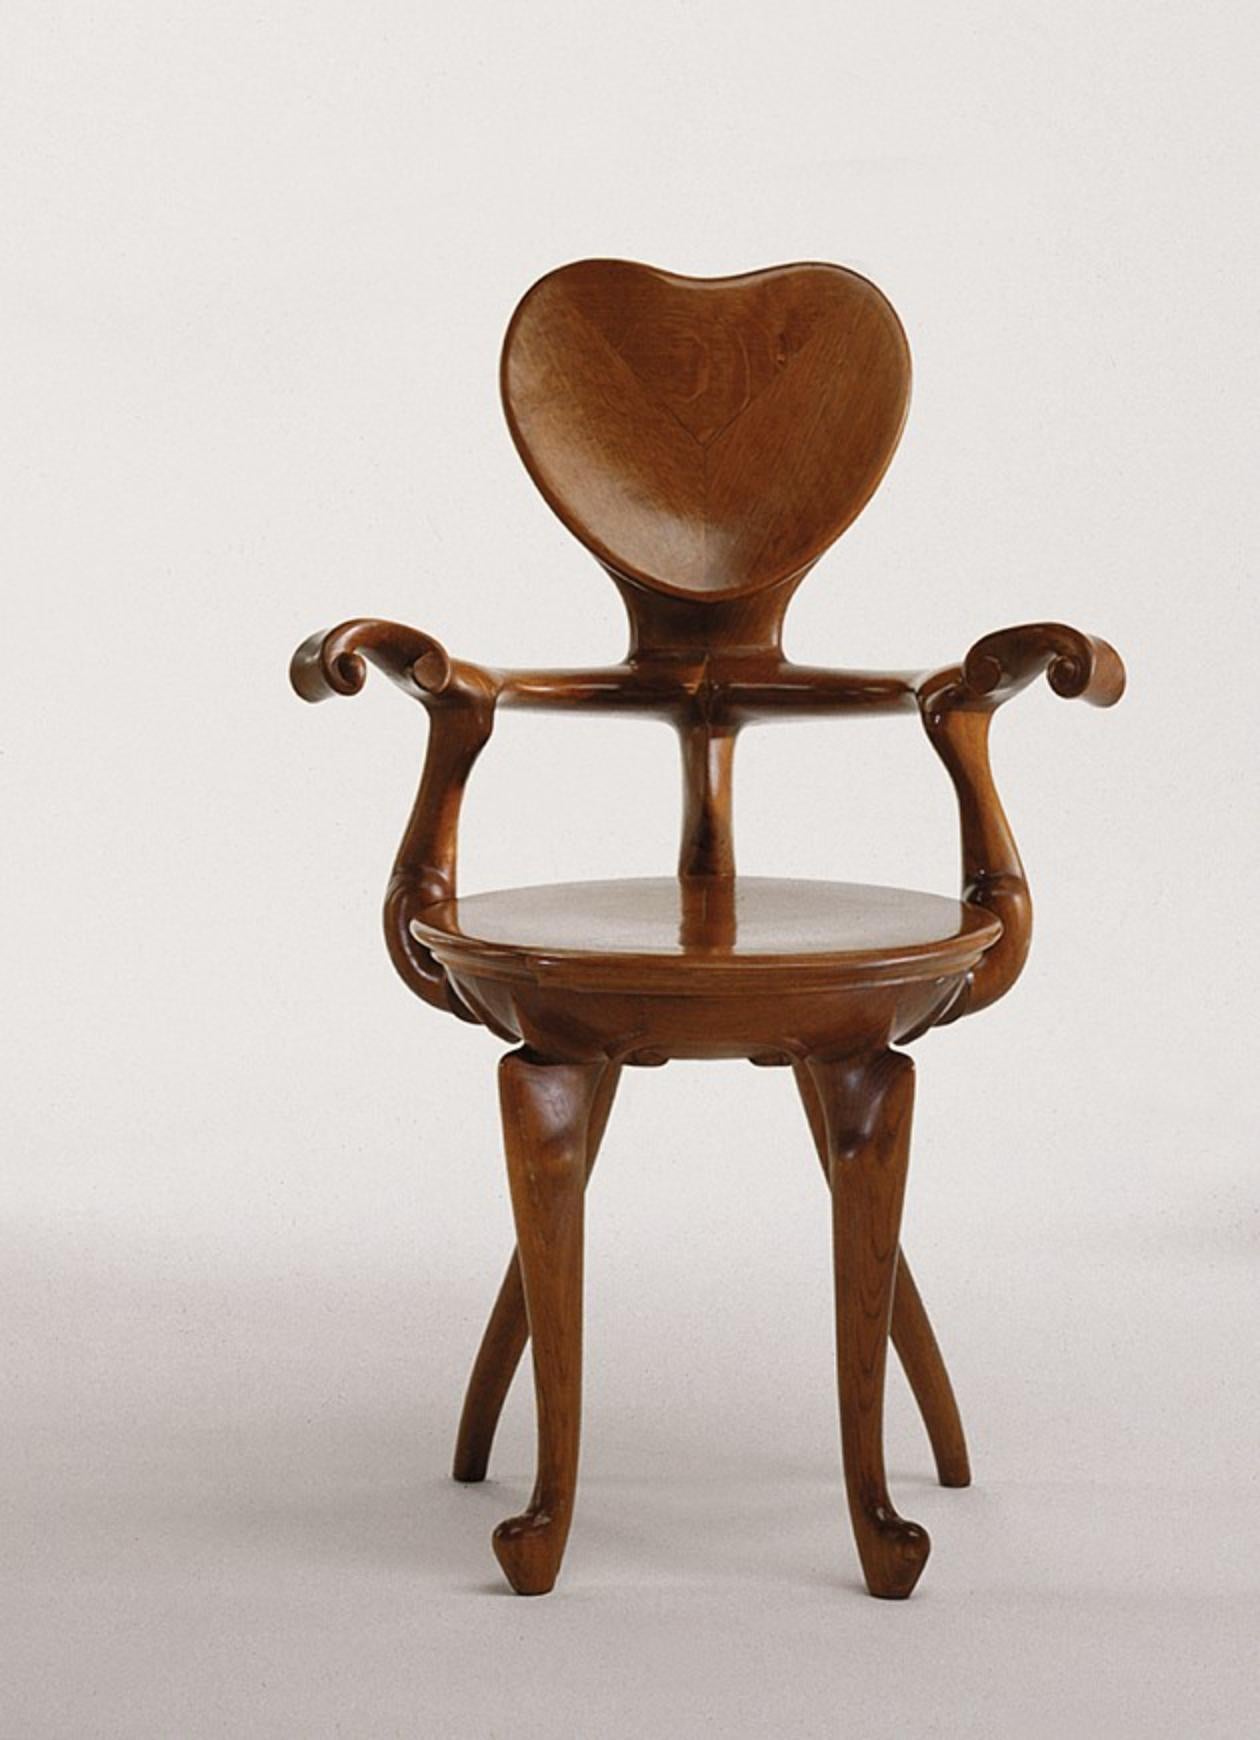 Calvet armchair, Antonio Gaudí
1902
Dimensions: 65 x 52 x 95 cm
Materials: Dark varnished oak

Solid dark varnished oak

Antoni Gaudí (1852/1926) is, without doubt, the most internationally well-known Spanish architect. But is not only his